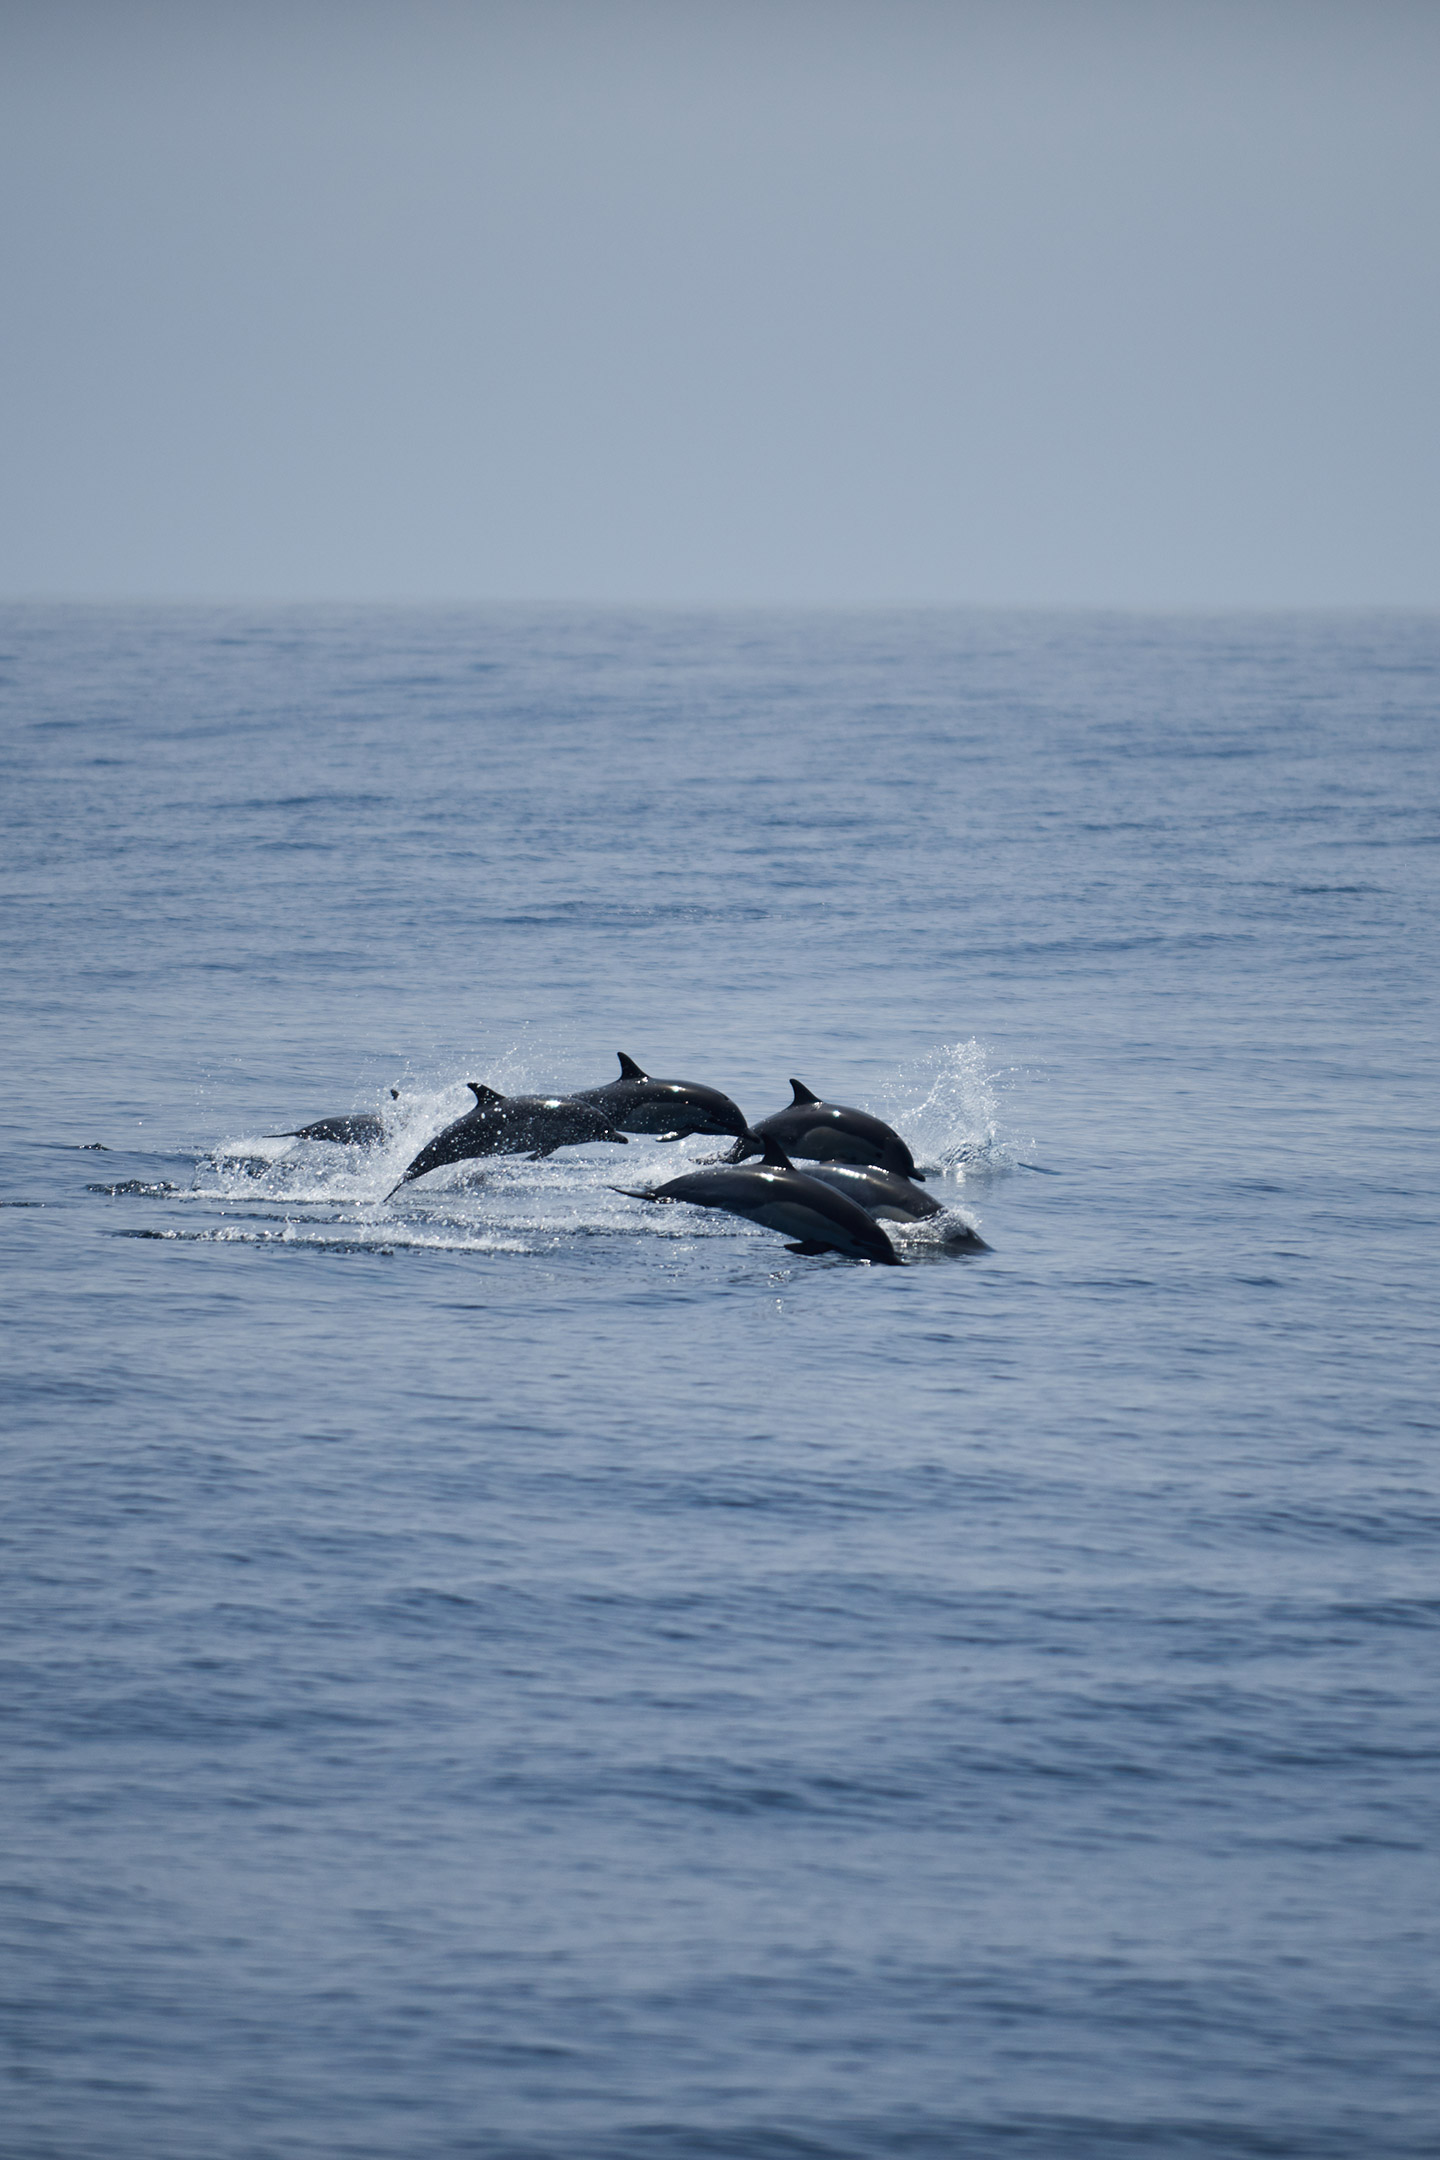 dolphins in the pacific ocean at the coast of Santa Monica